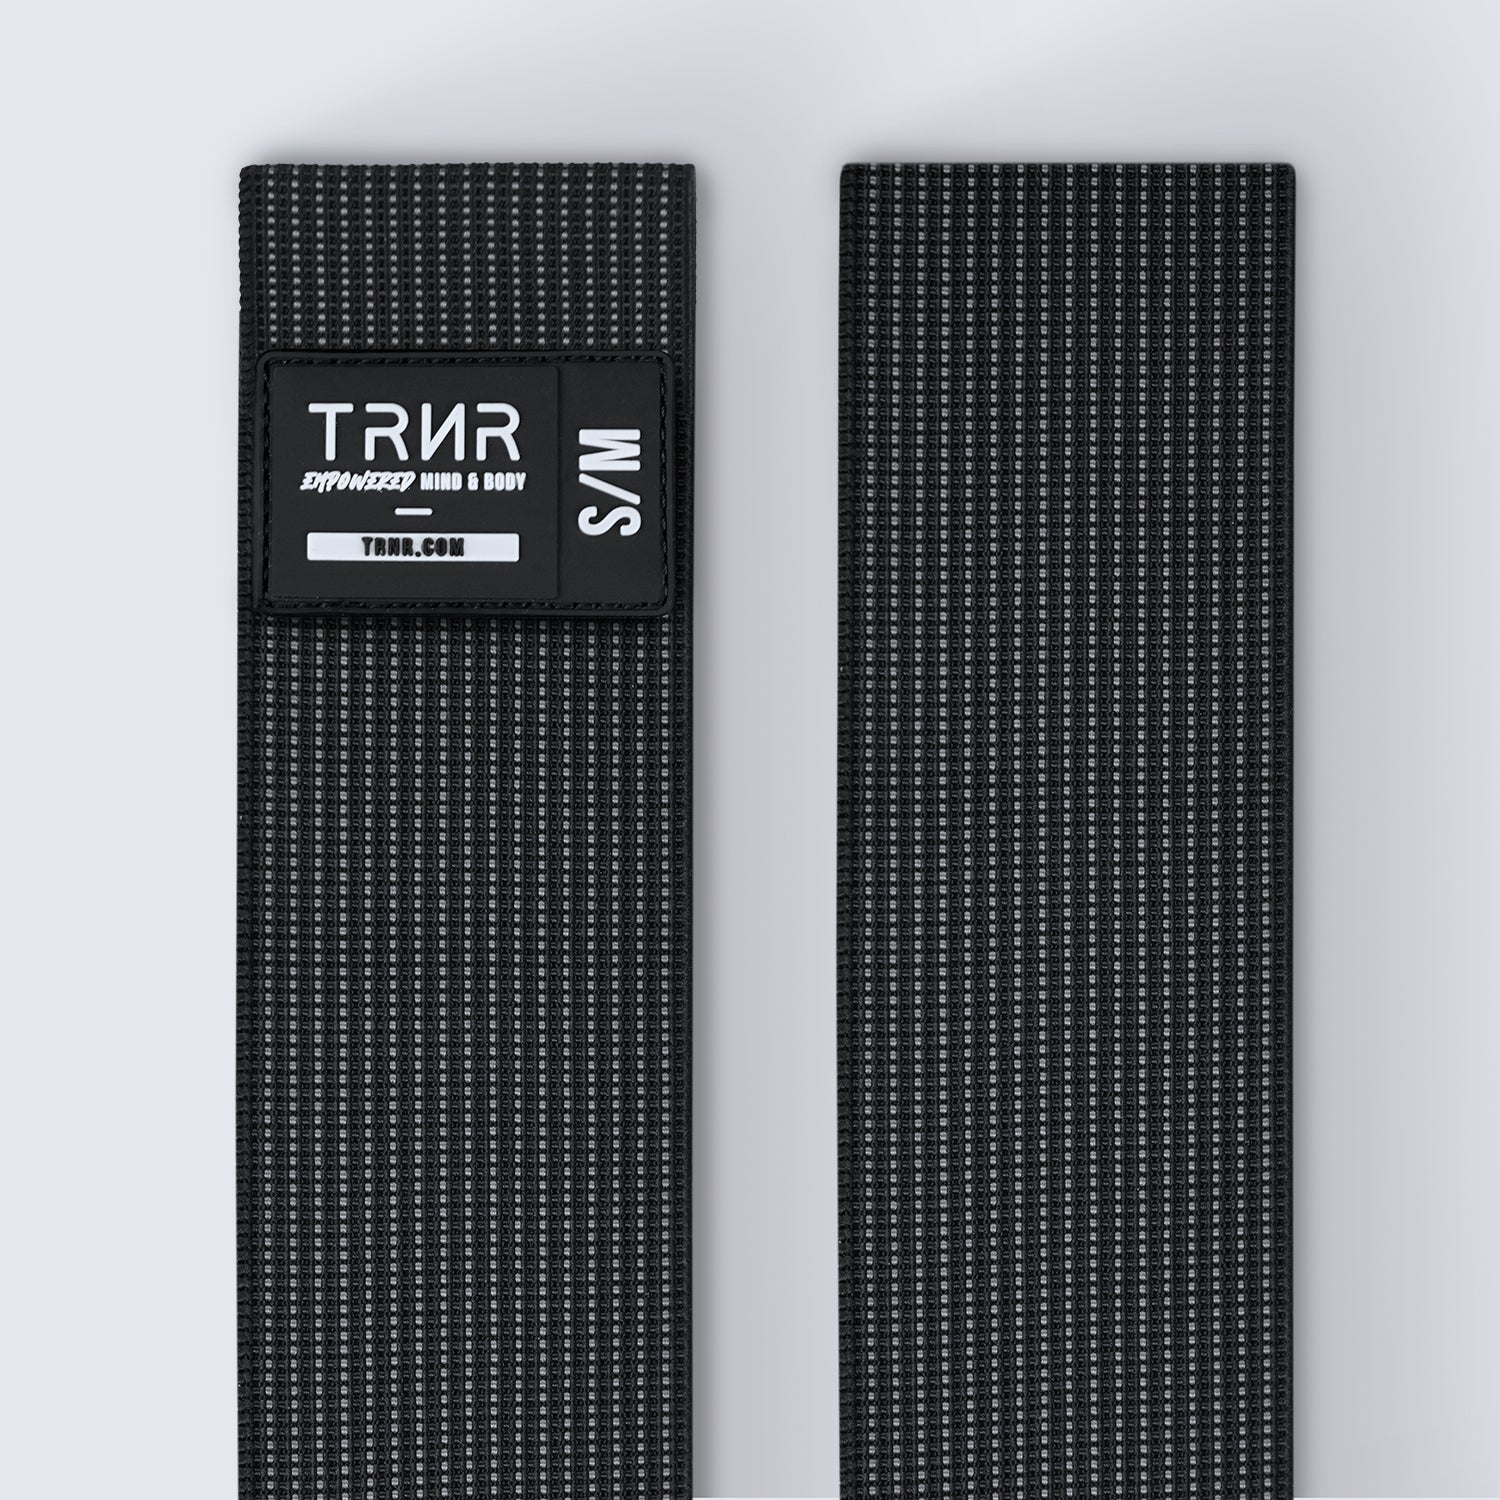 TRNR Stretch Band S/M | Close-Up of Webbing and Label